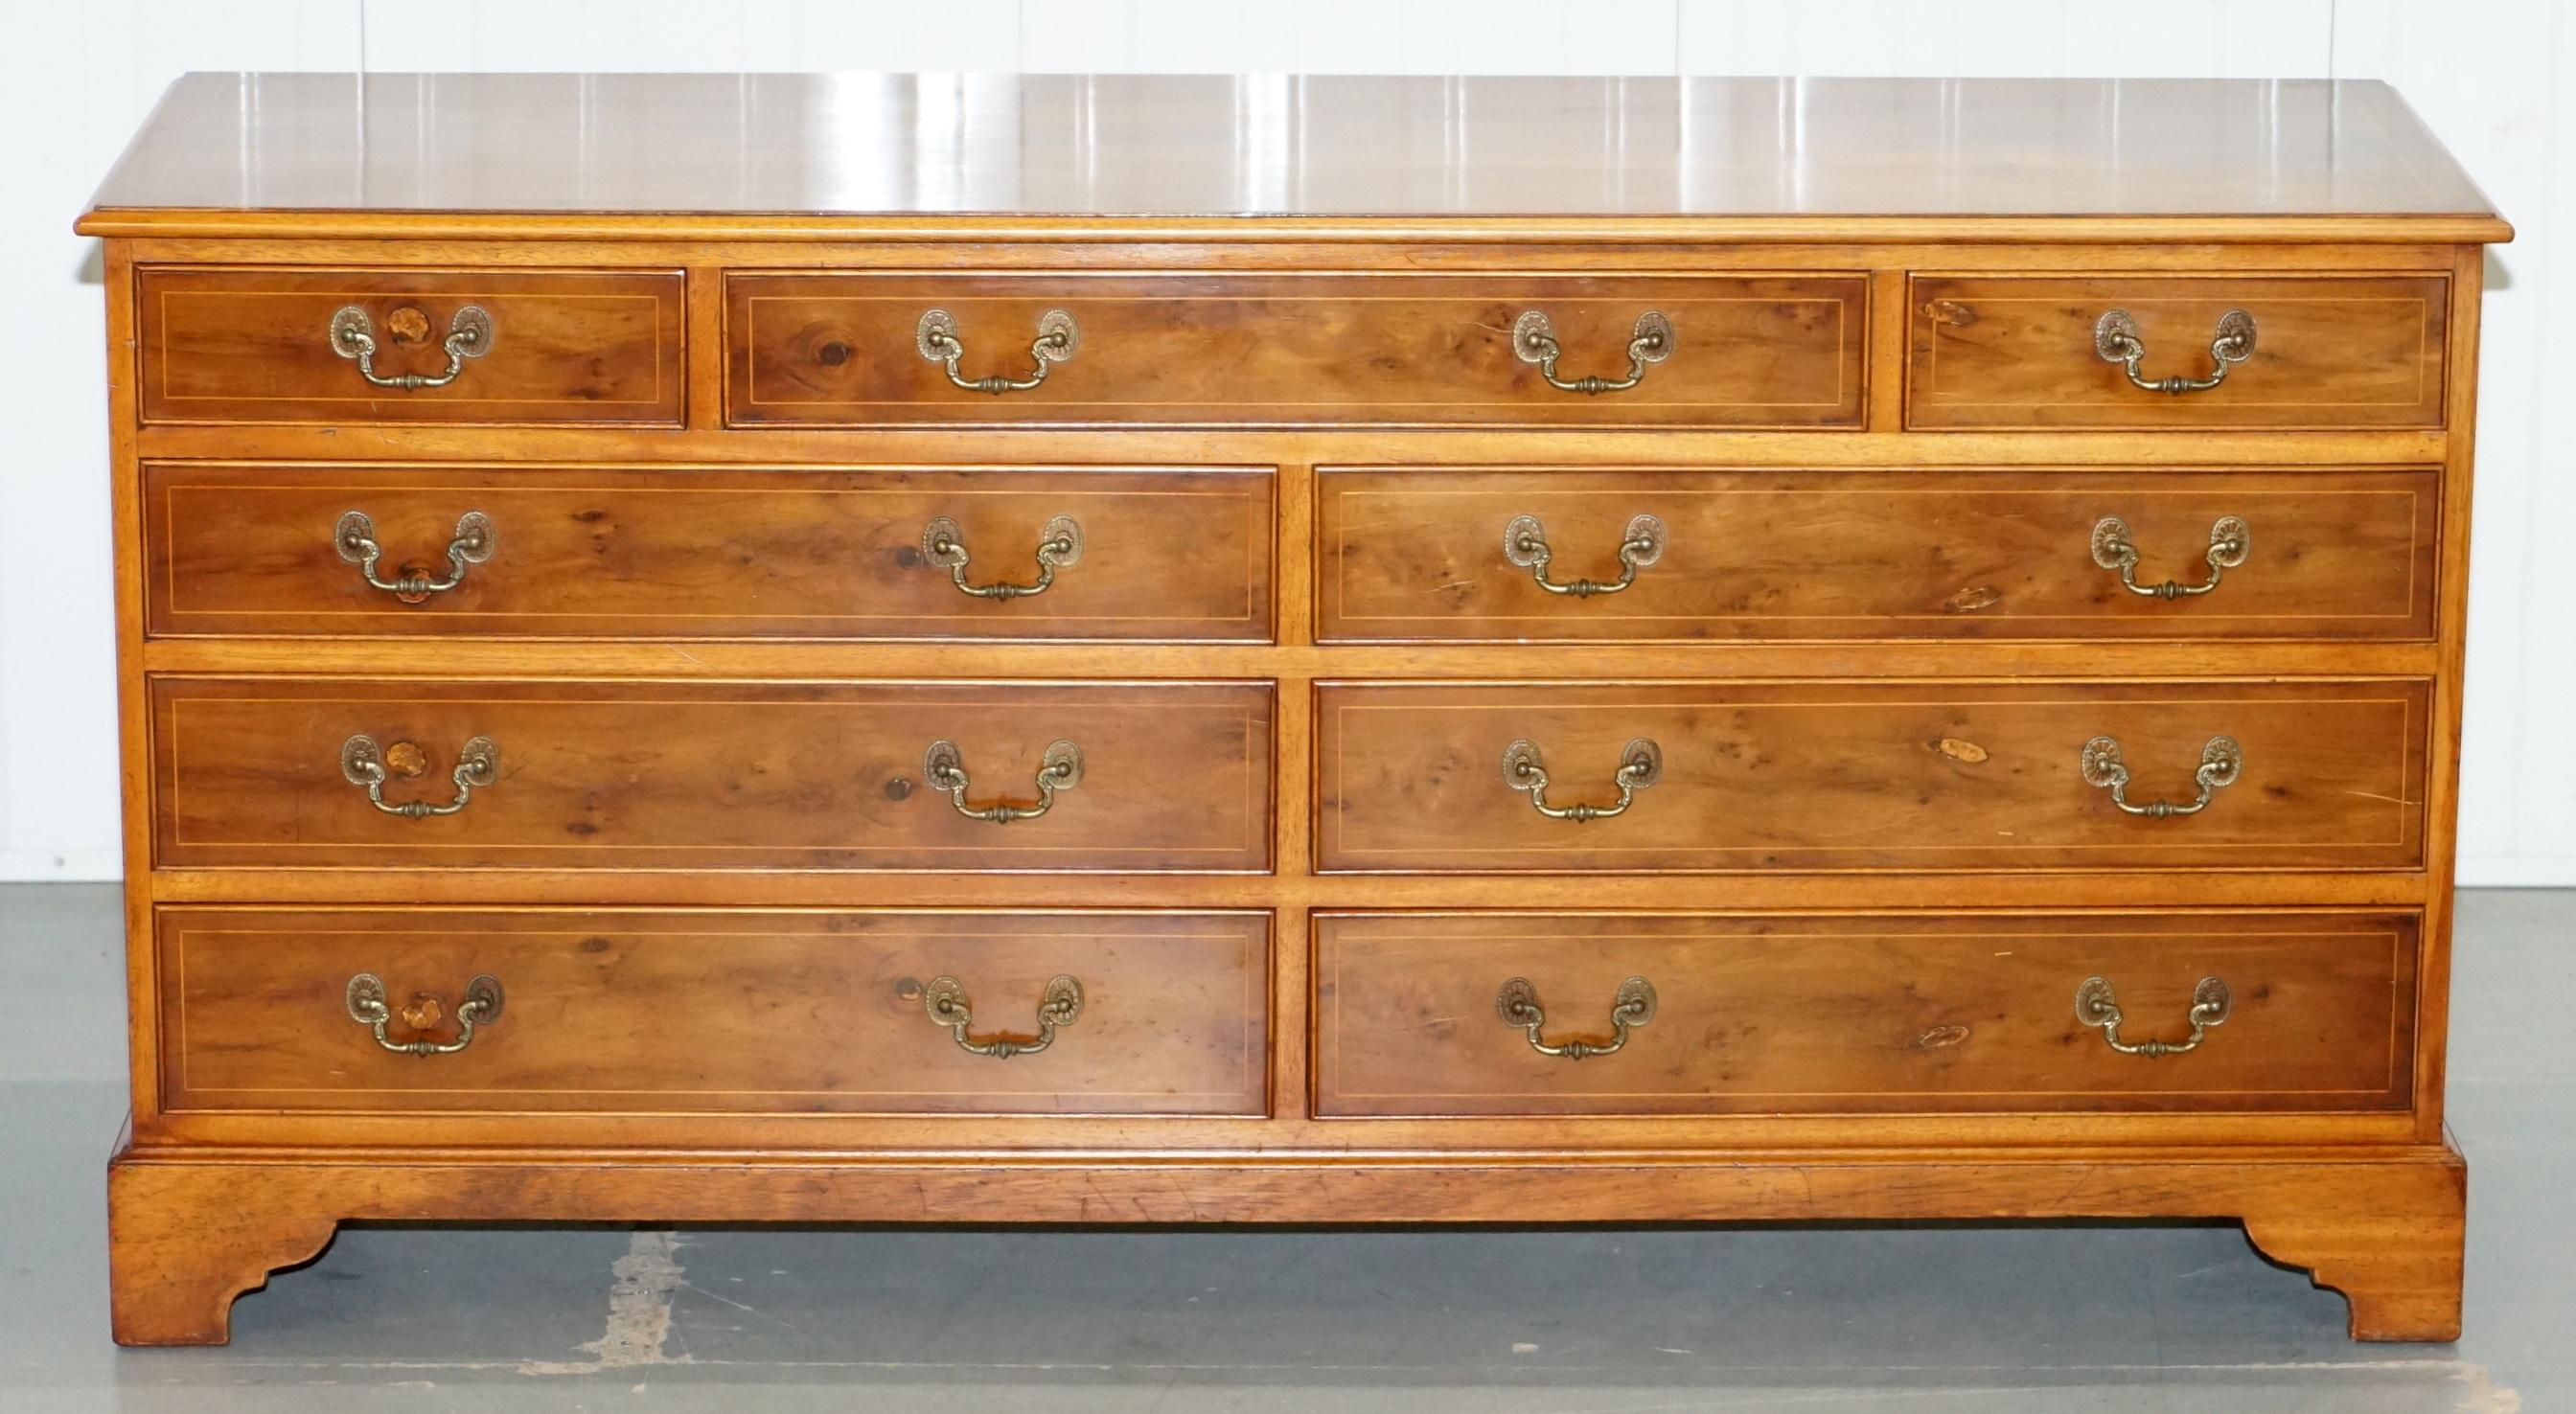 Wimbledon-Furniture is delighted to offer for sale this lovely burr Yew wood sideboard bank of drawers handmade in England by Burton Furniture

Please note the delivery fee listed is just a guide, it covers within the M25 only, for an accurate